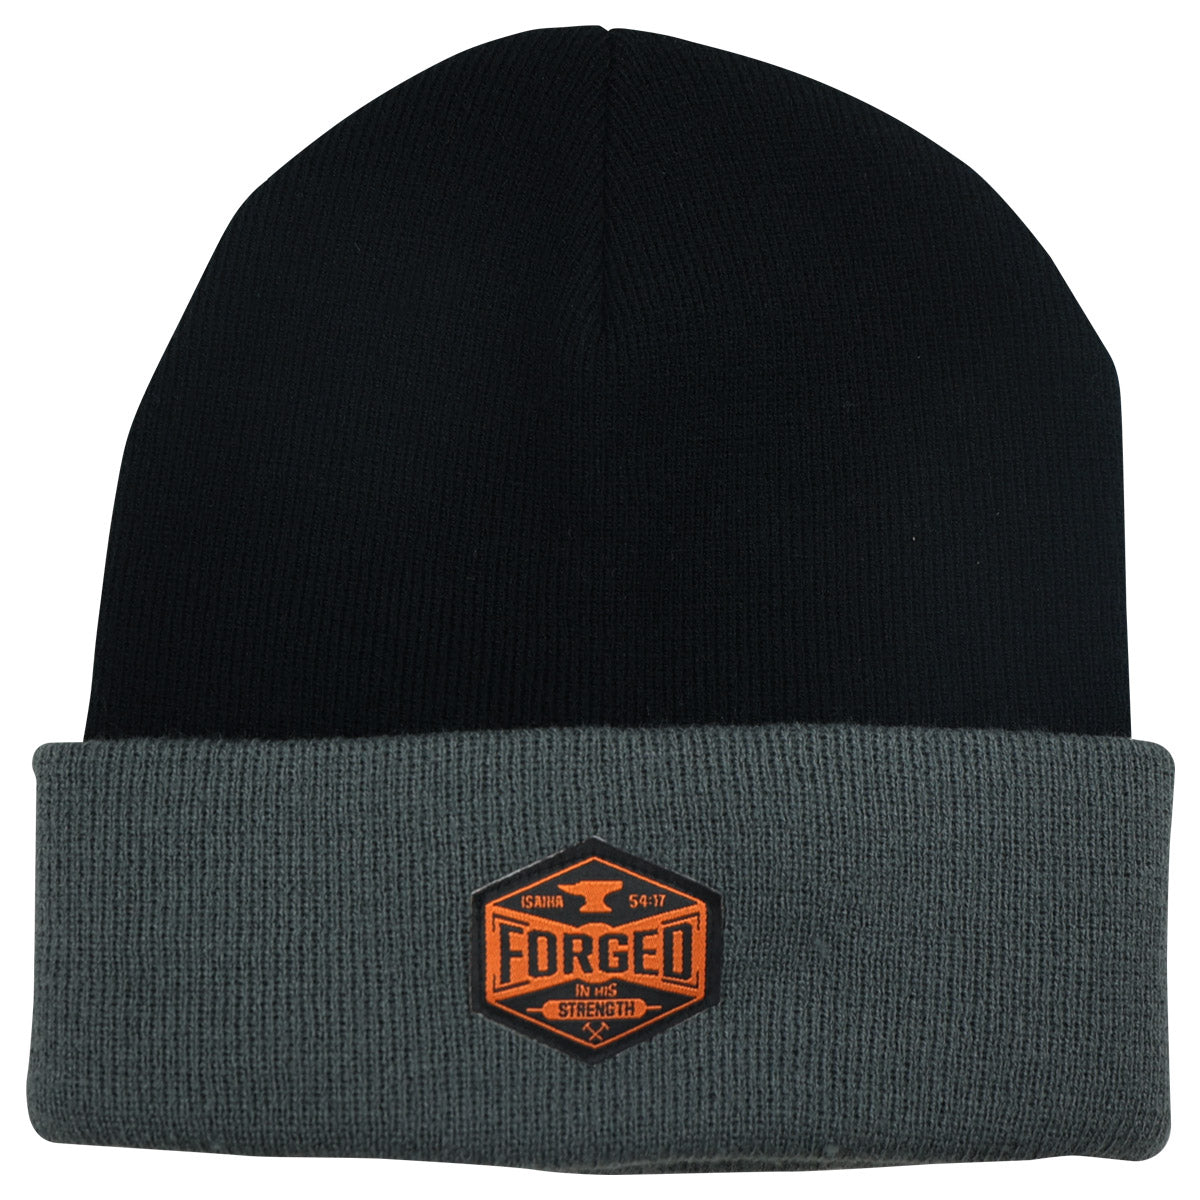 Kerusso Mens Beanie Forged